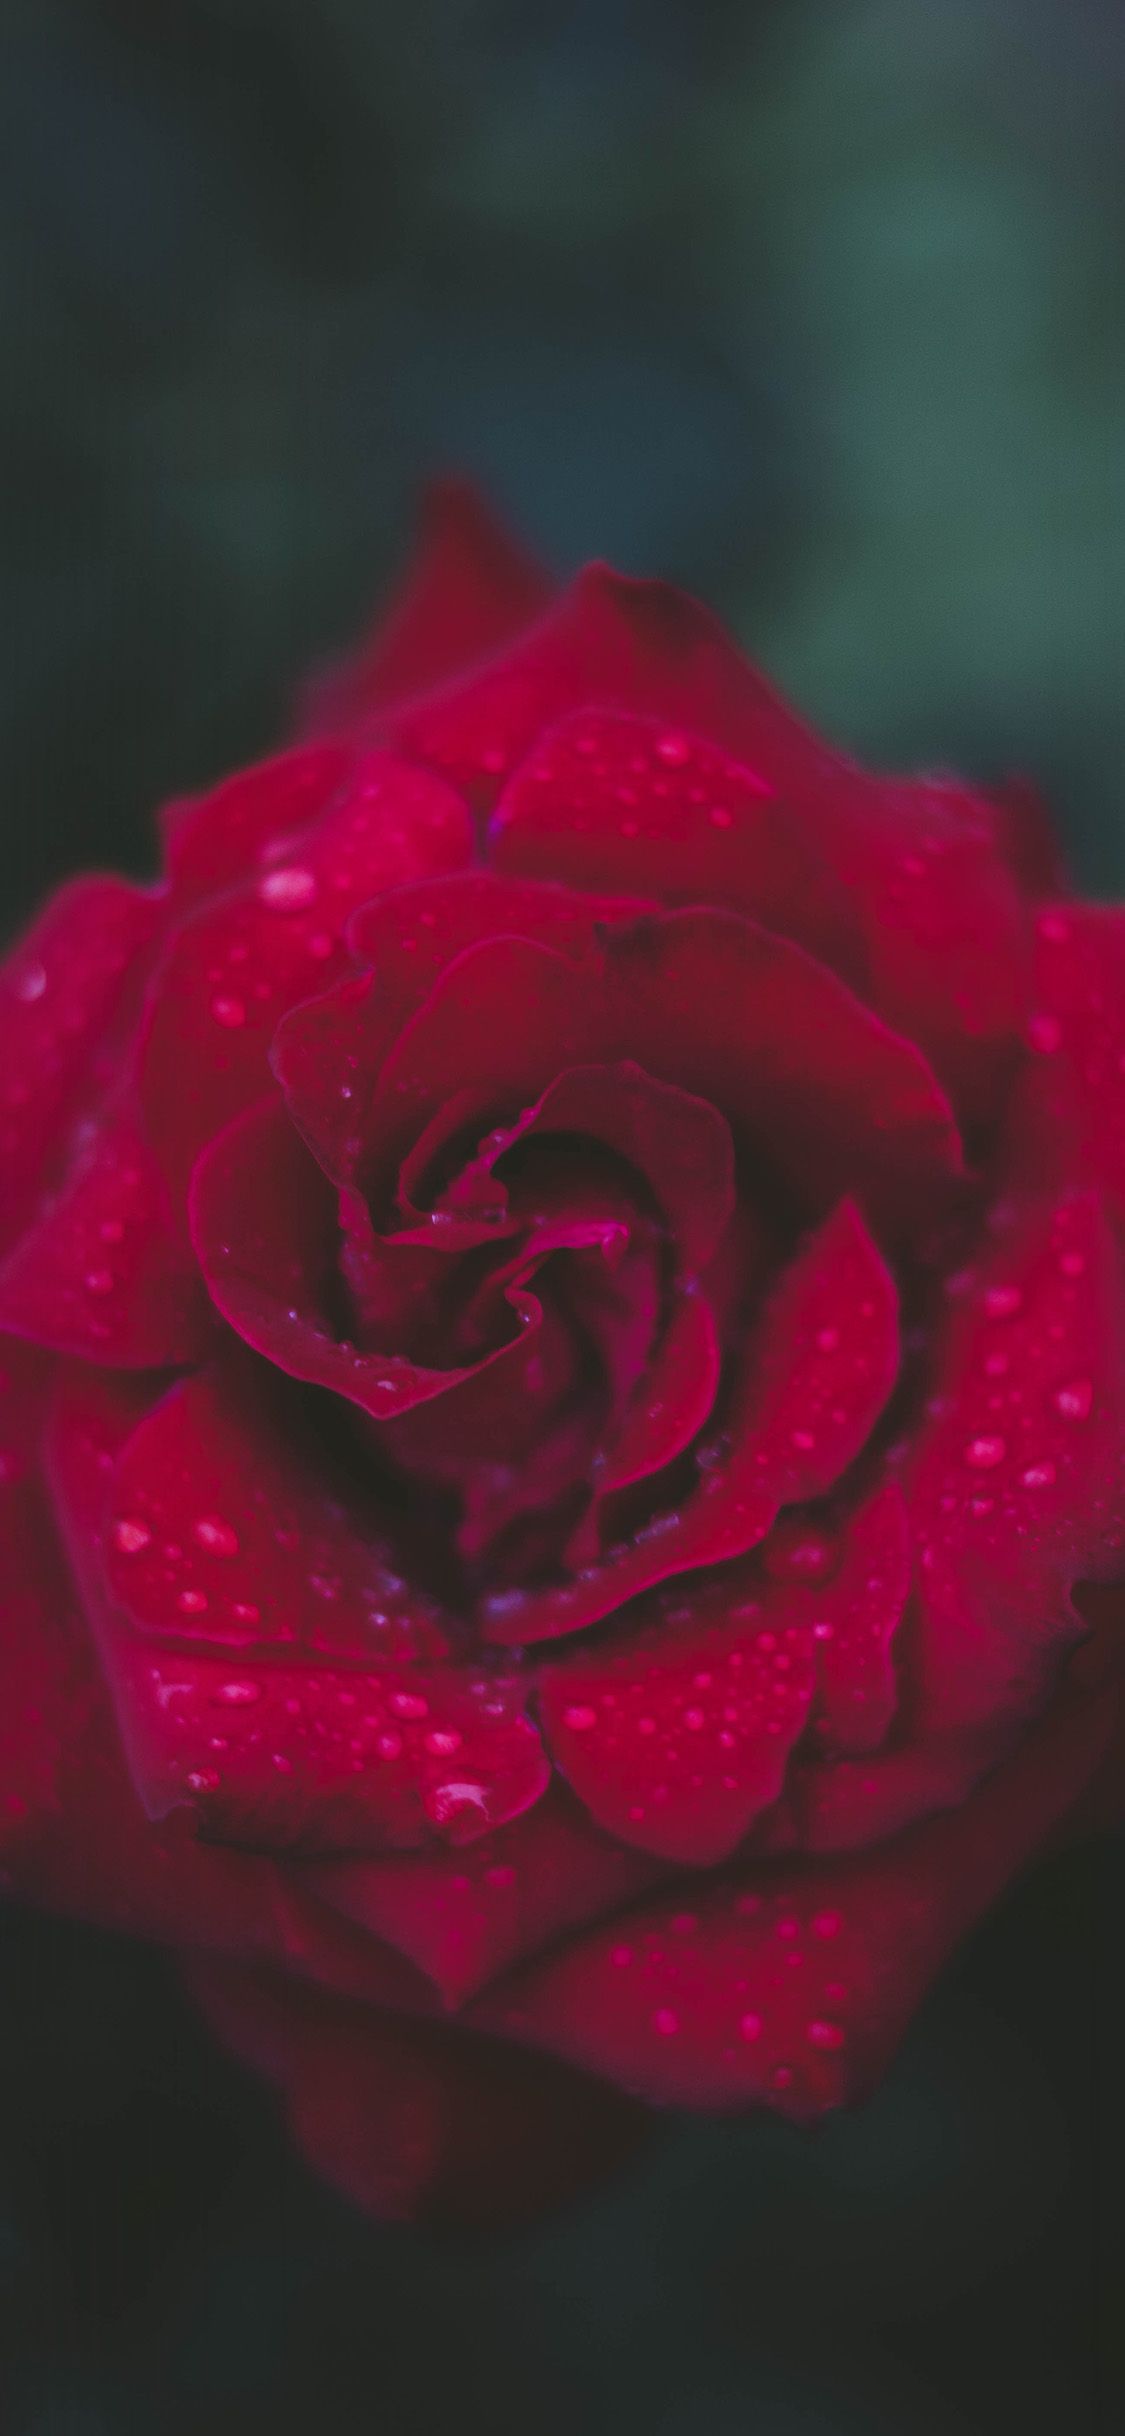 iPhone X wallpaper. rose red flower nature